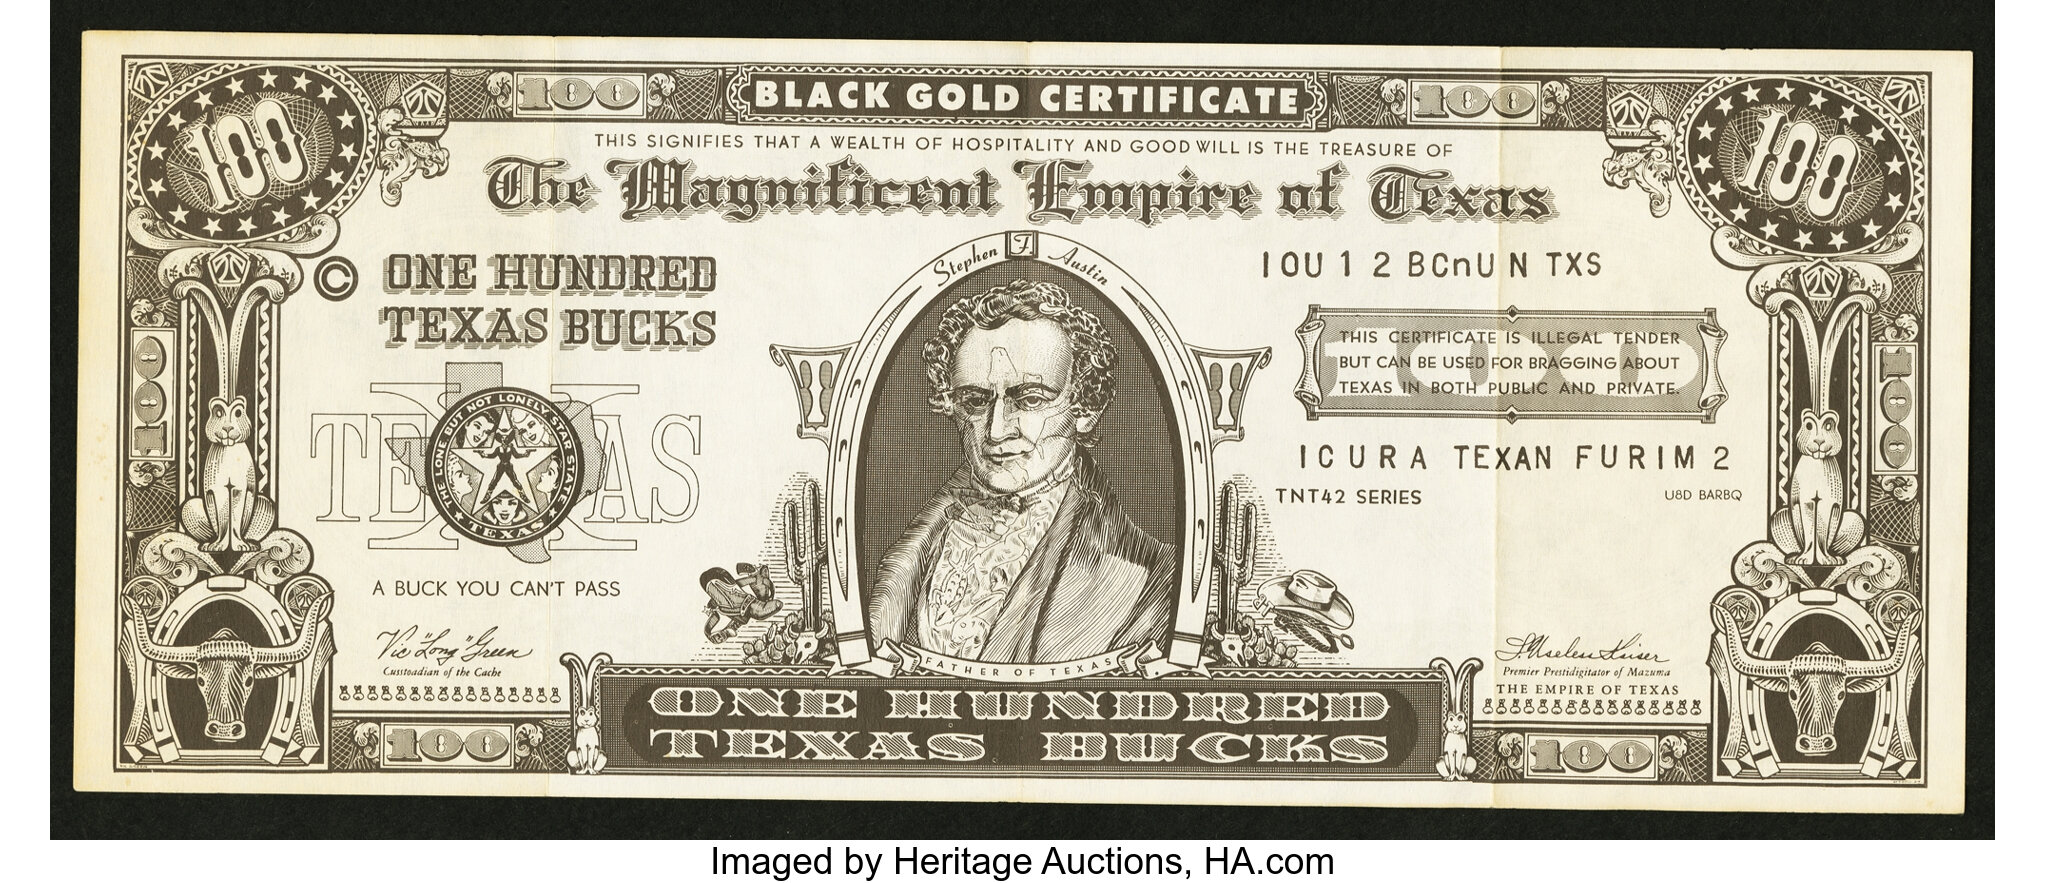 Empire Gold Certificate on White Parchment - Set of 100